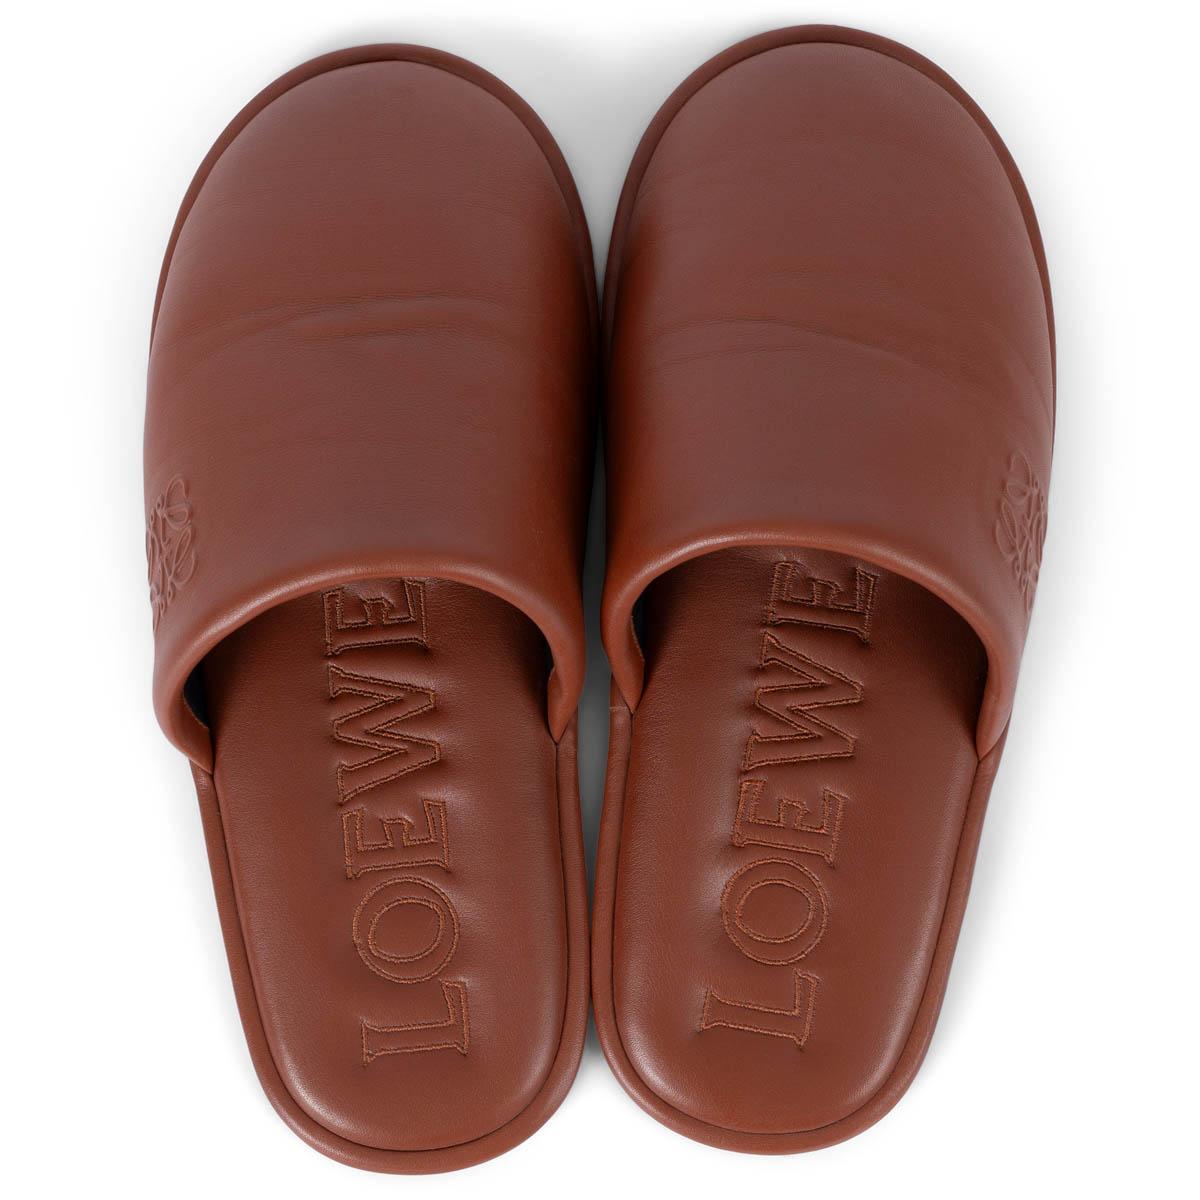 LOEWE cognac leather LOGO EMBOSSED SLIPPERS Flats Shoes 39 fit 38.5 For Sale 1